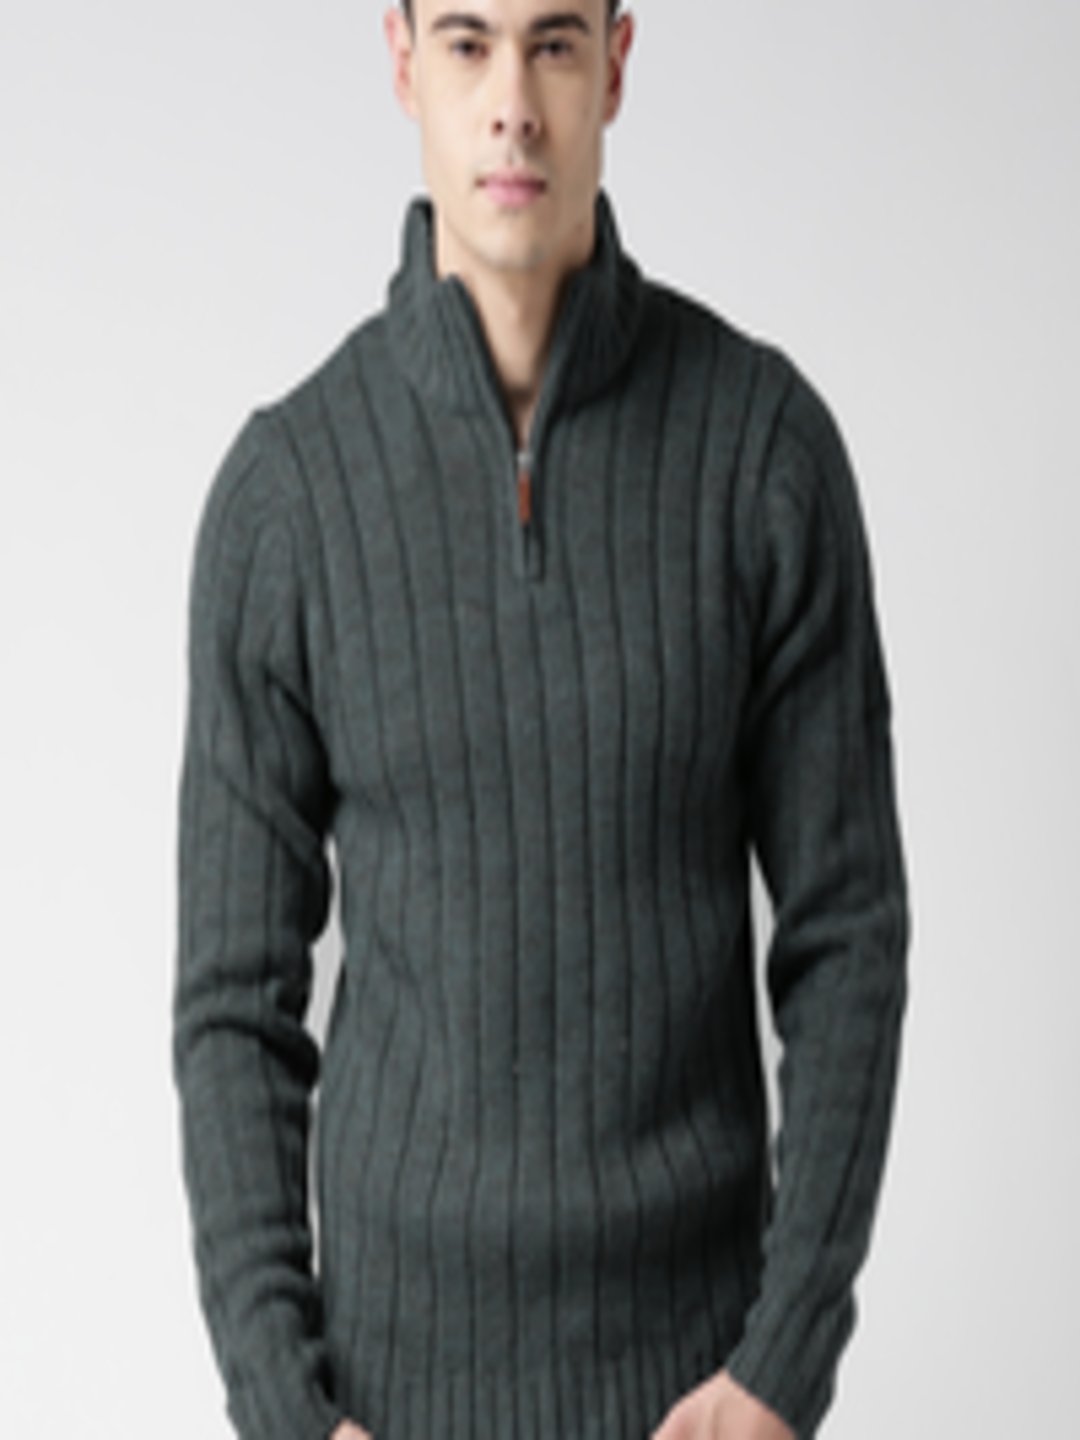 Buy BLEND Grey Self Striped Slim Fit Sweater - Sweaters for Men 986543 ...